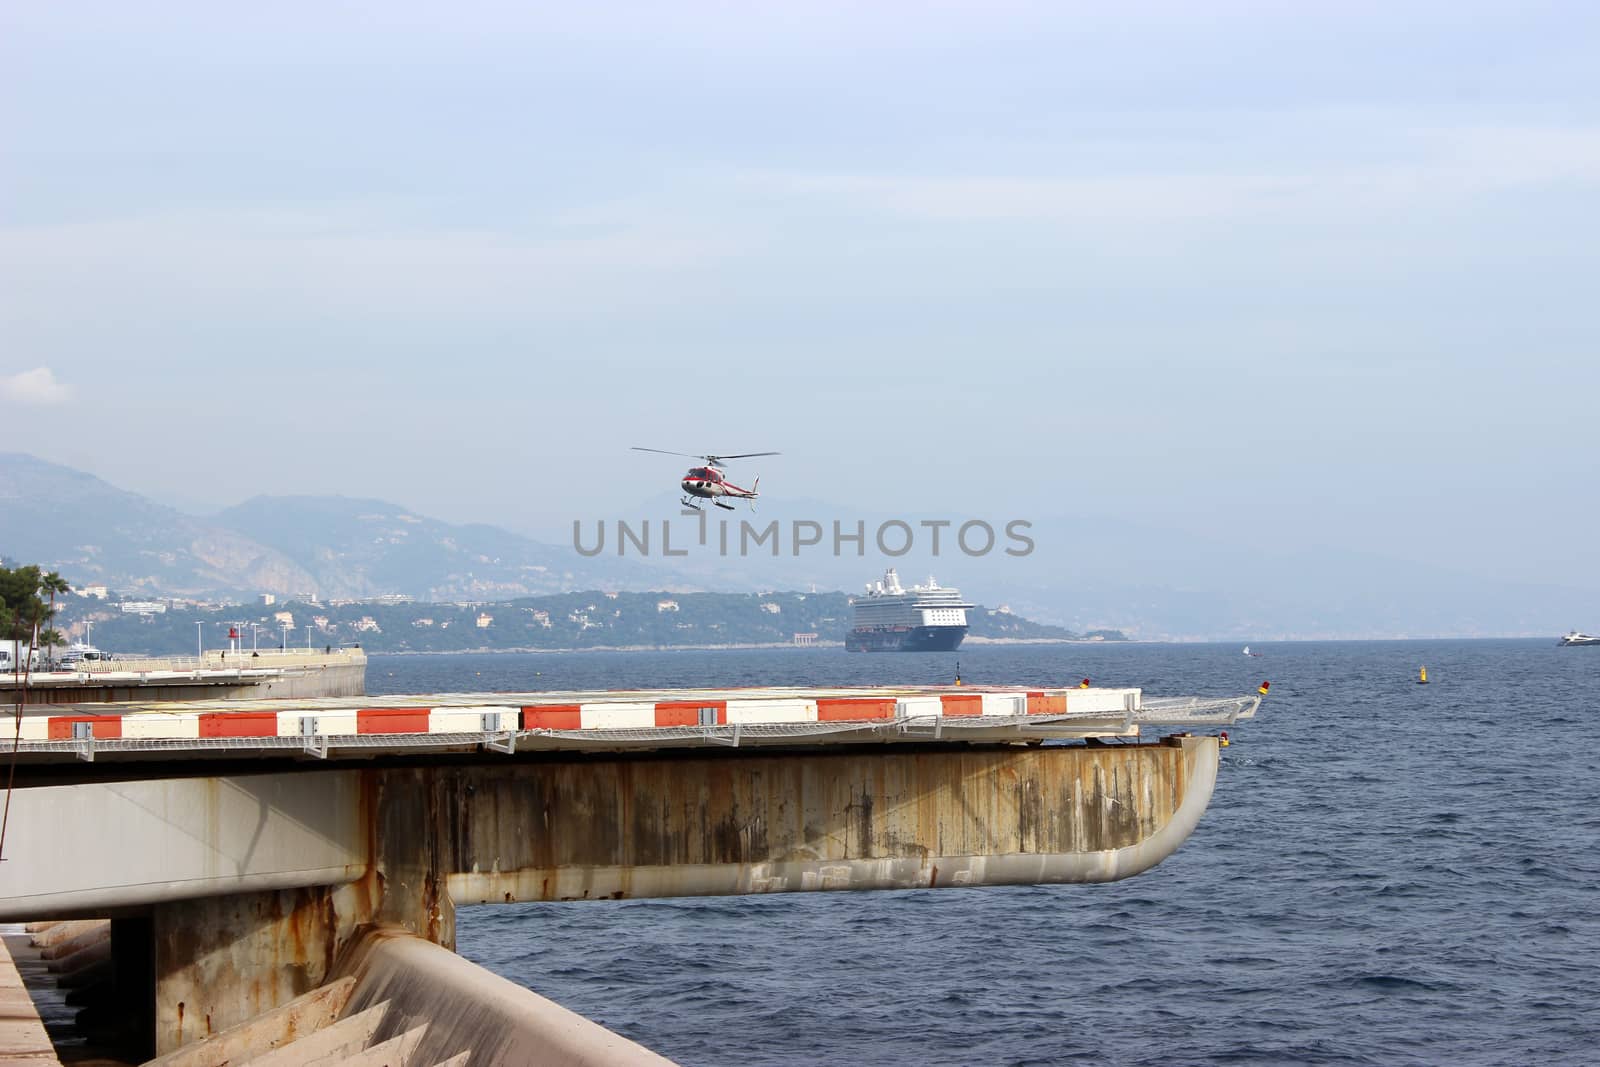 Fontvieille, Monaco - October 24, 2015: A Helicopter Landing at the Heliport of Monaco. District of Fontvieille in the Principality of Monaco